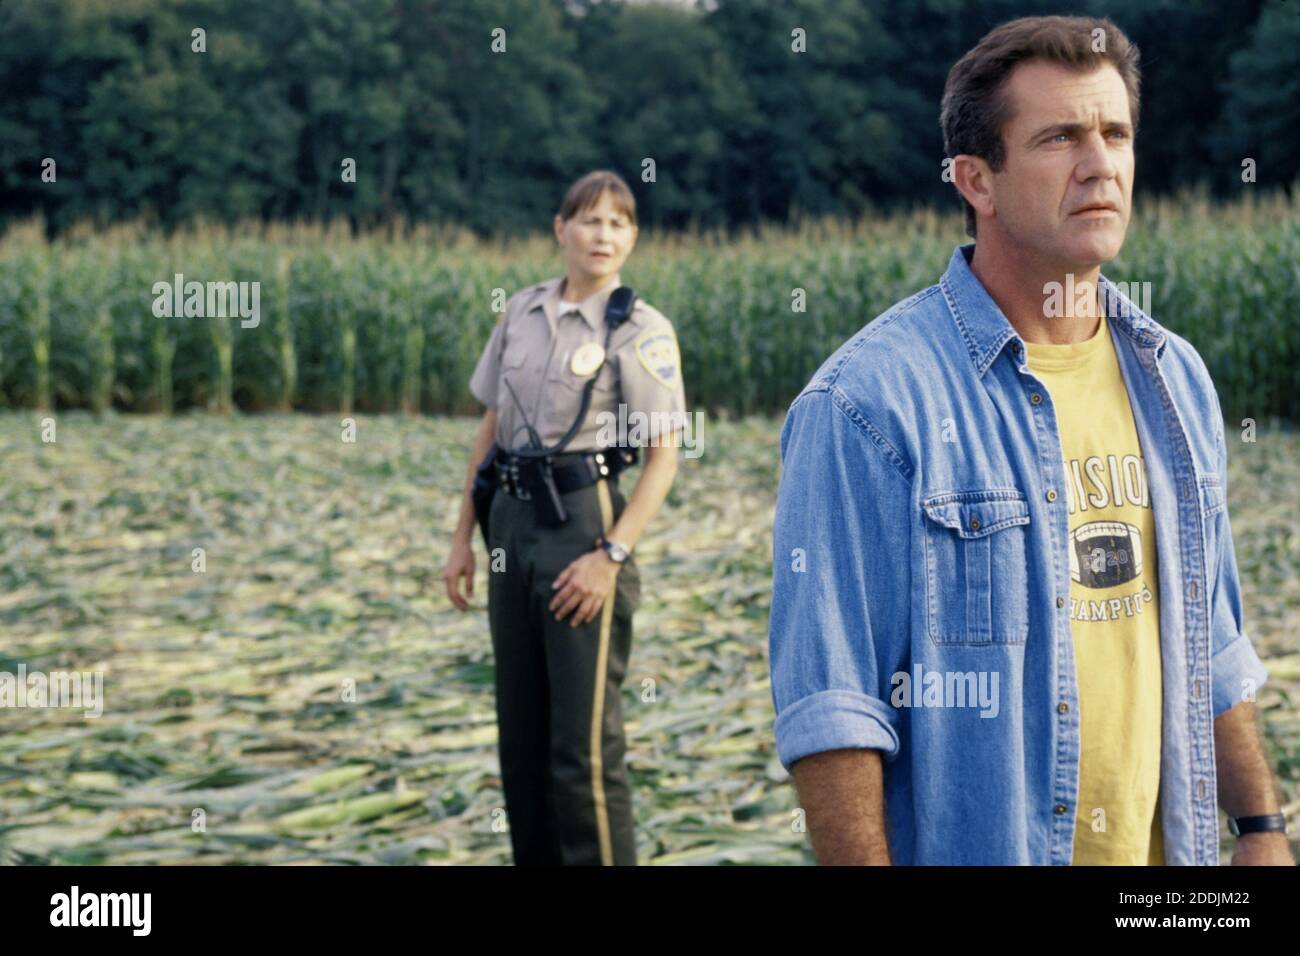 Mel Gibson, 'Signs' (2002)  Photo credit: Touchstone / The Hollywood Archive / File Reference # 34078-0325FSTHA Stock Photo